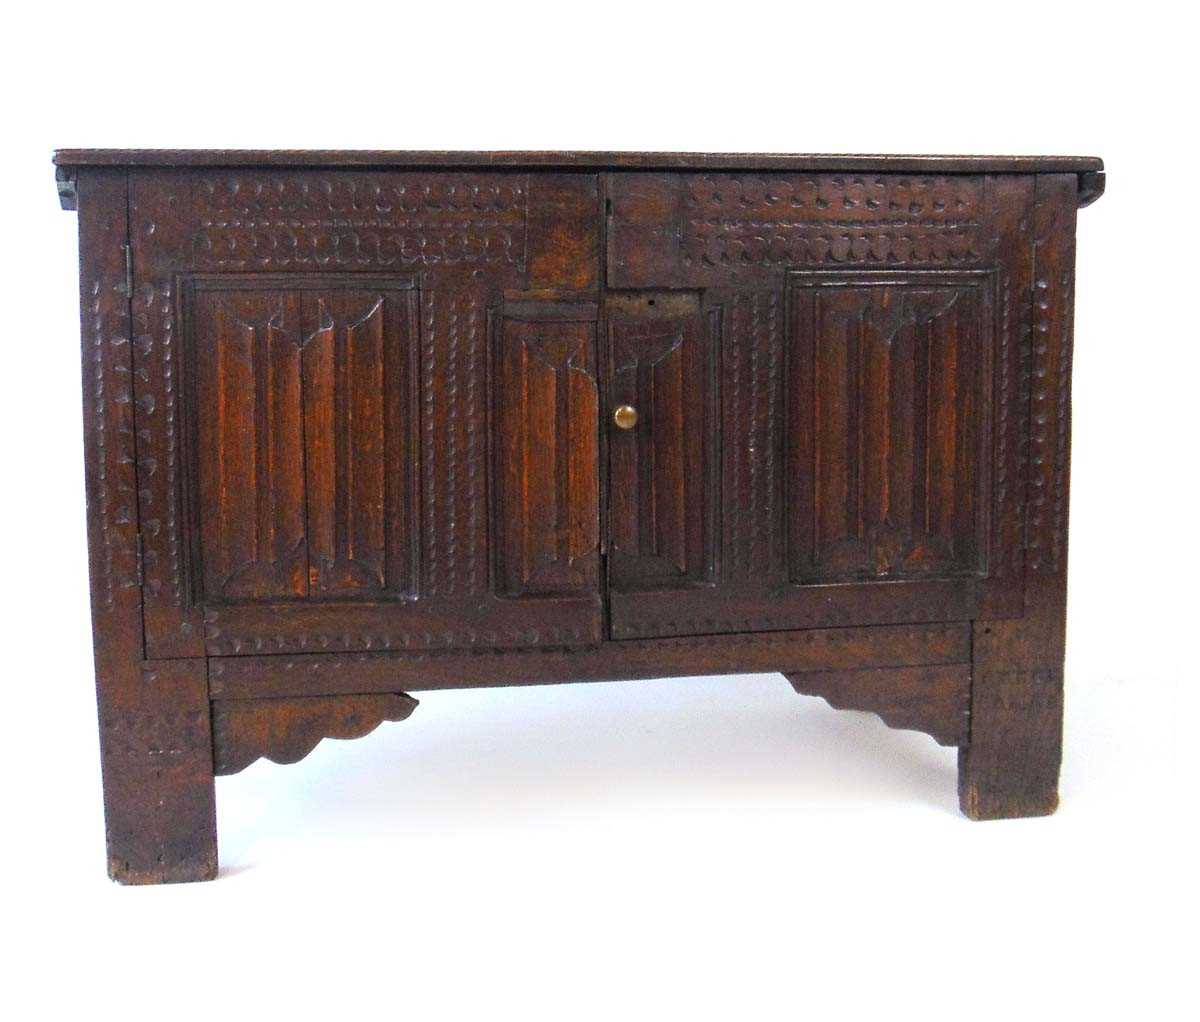 An early 18th century oak blanket box, later converted to a cupboard, with carved linen fold panels, - Image 2 of 4